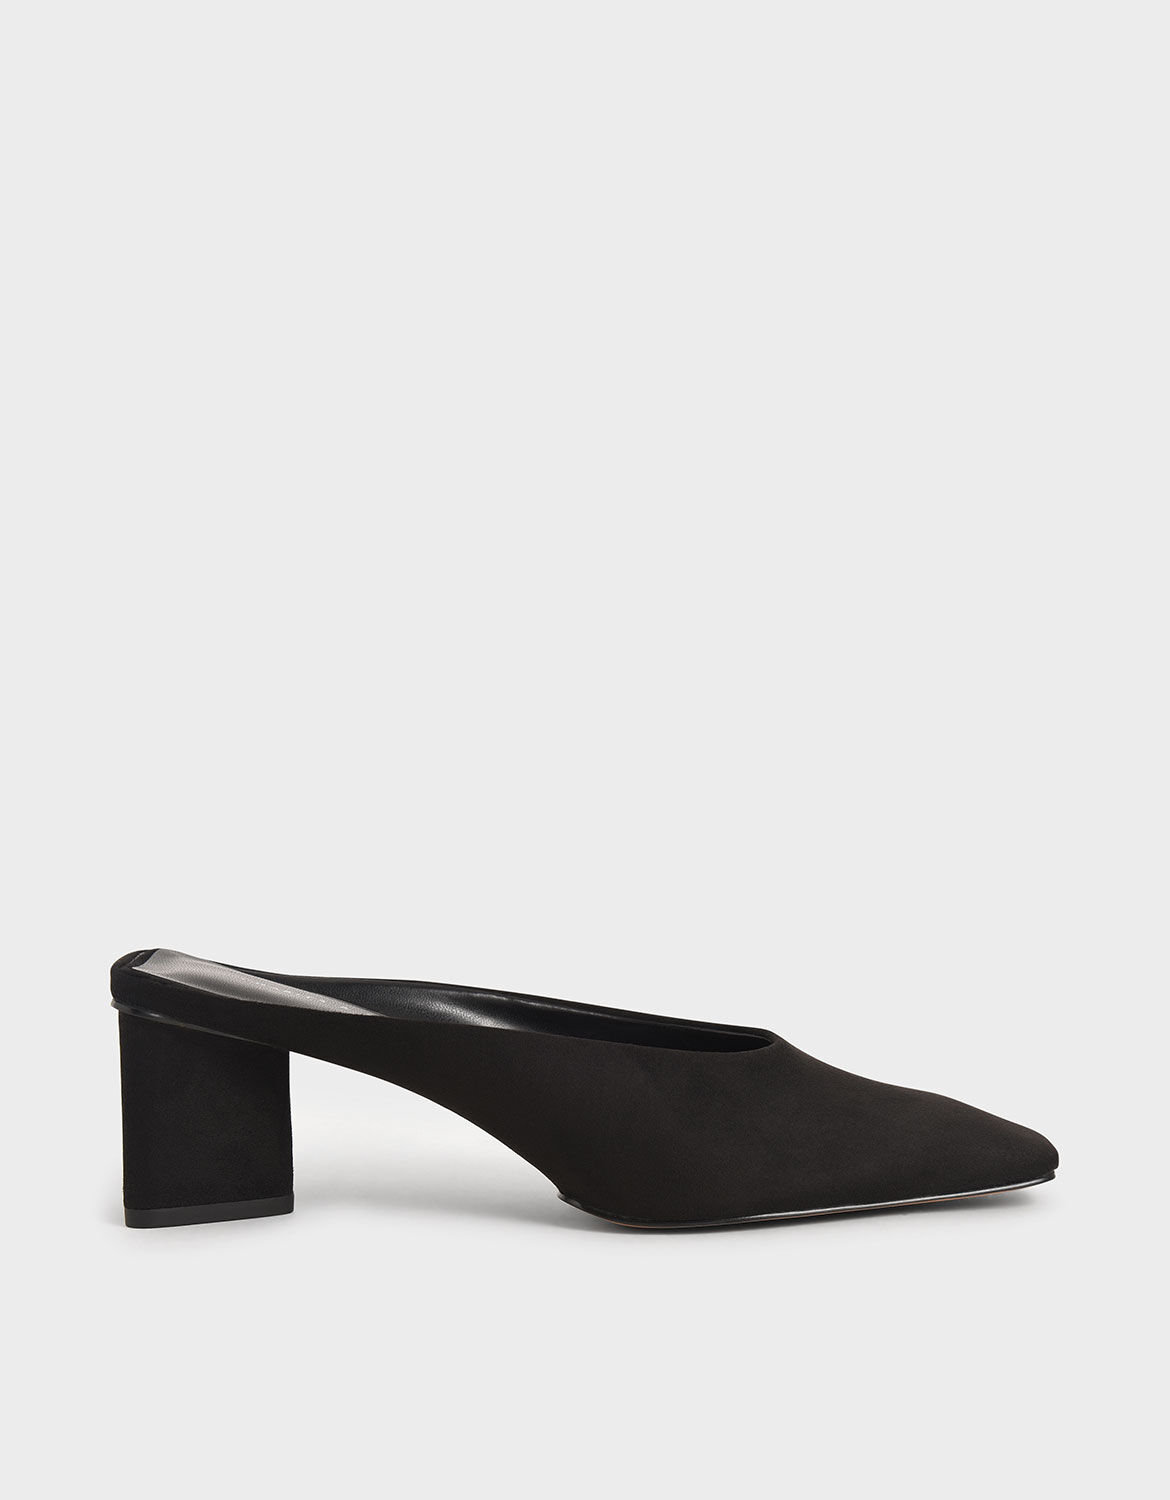 Shop Women's Shoes Online - CHARLES & KEITH USD